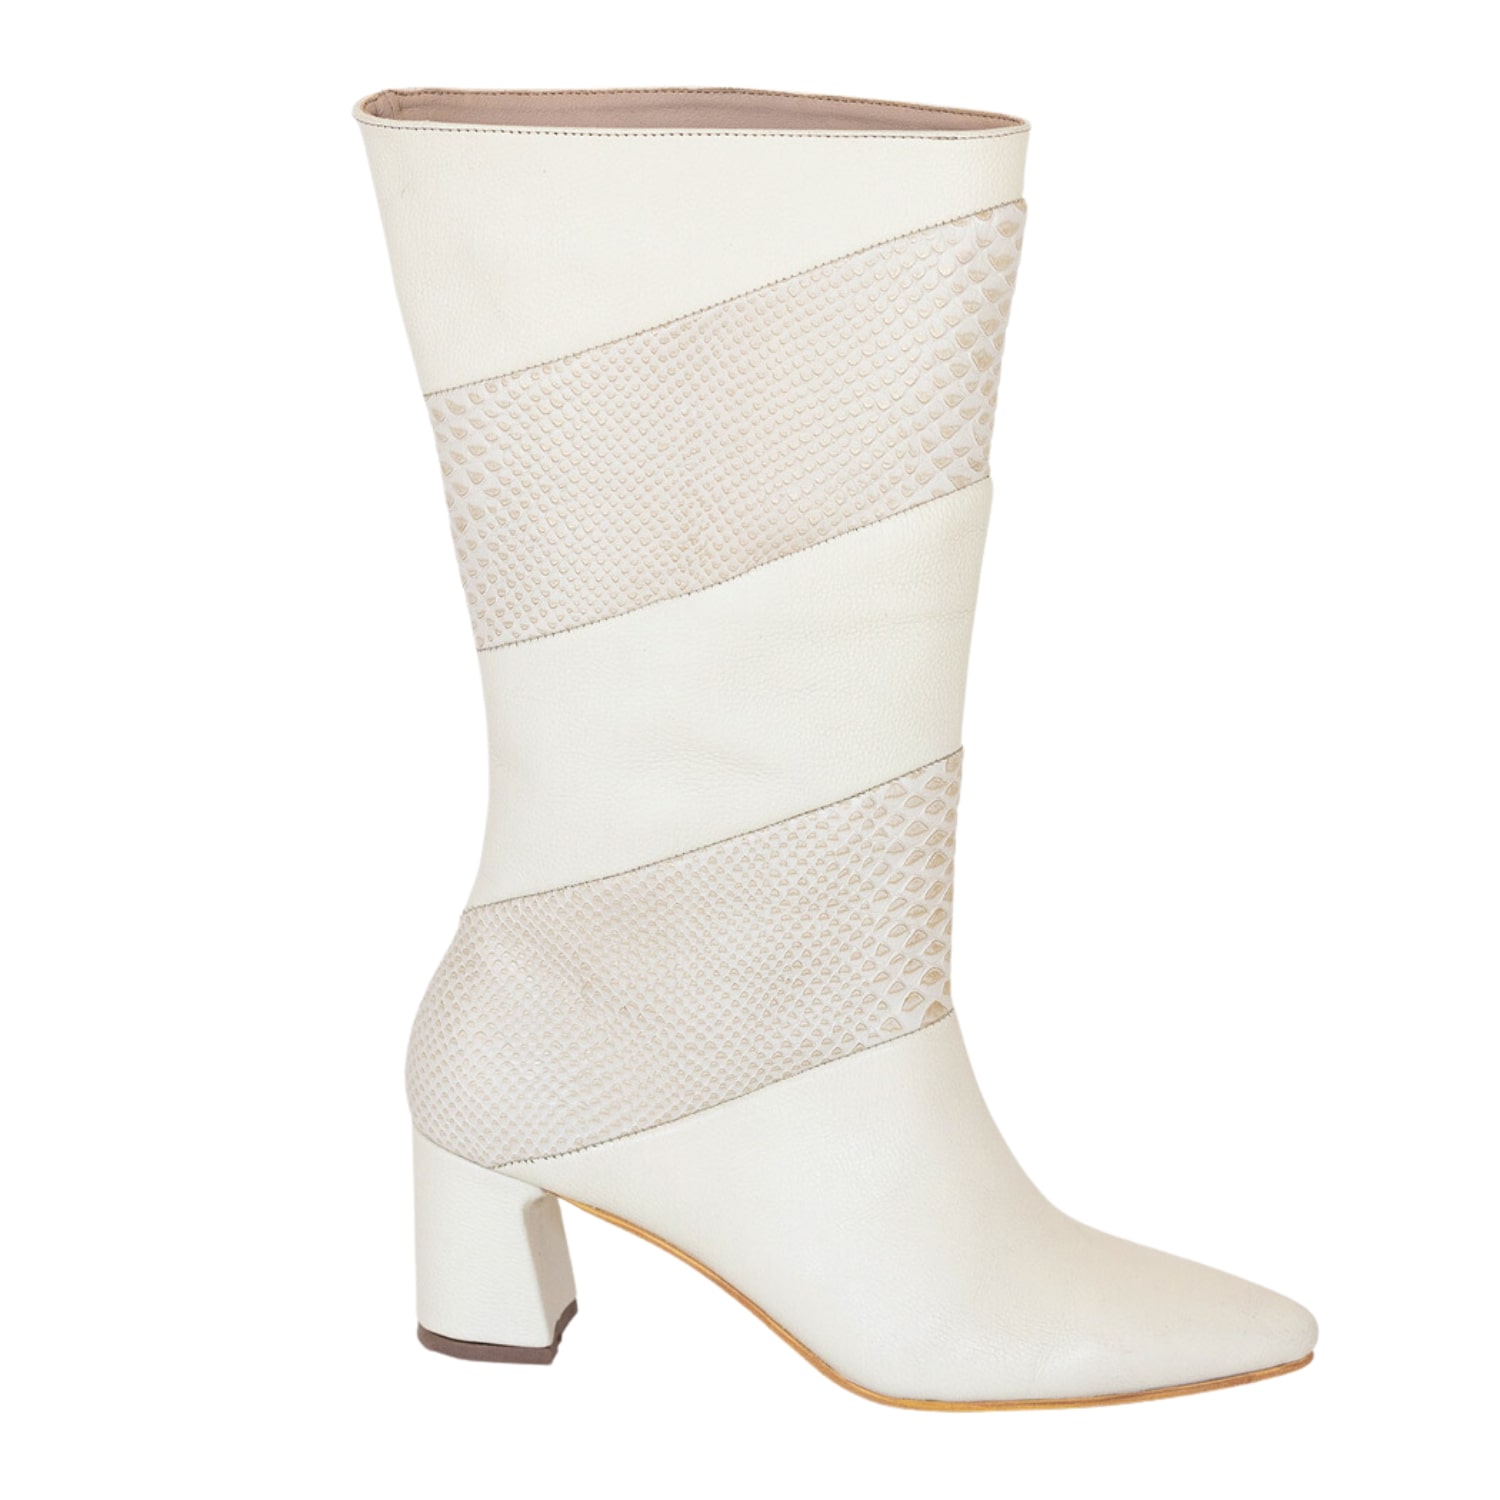 Women’s Neutrals Ela Boots In White & Ivory Croc Embossed Leather 6 Uk Stivali New York